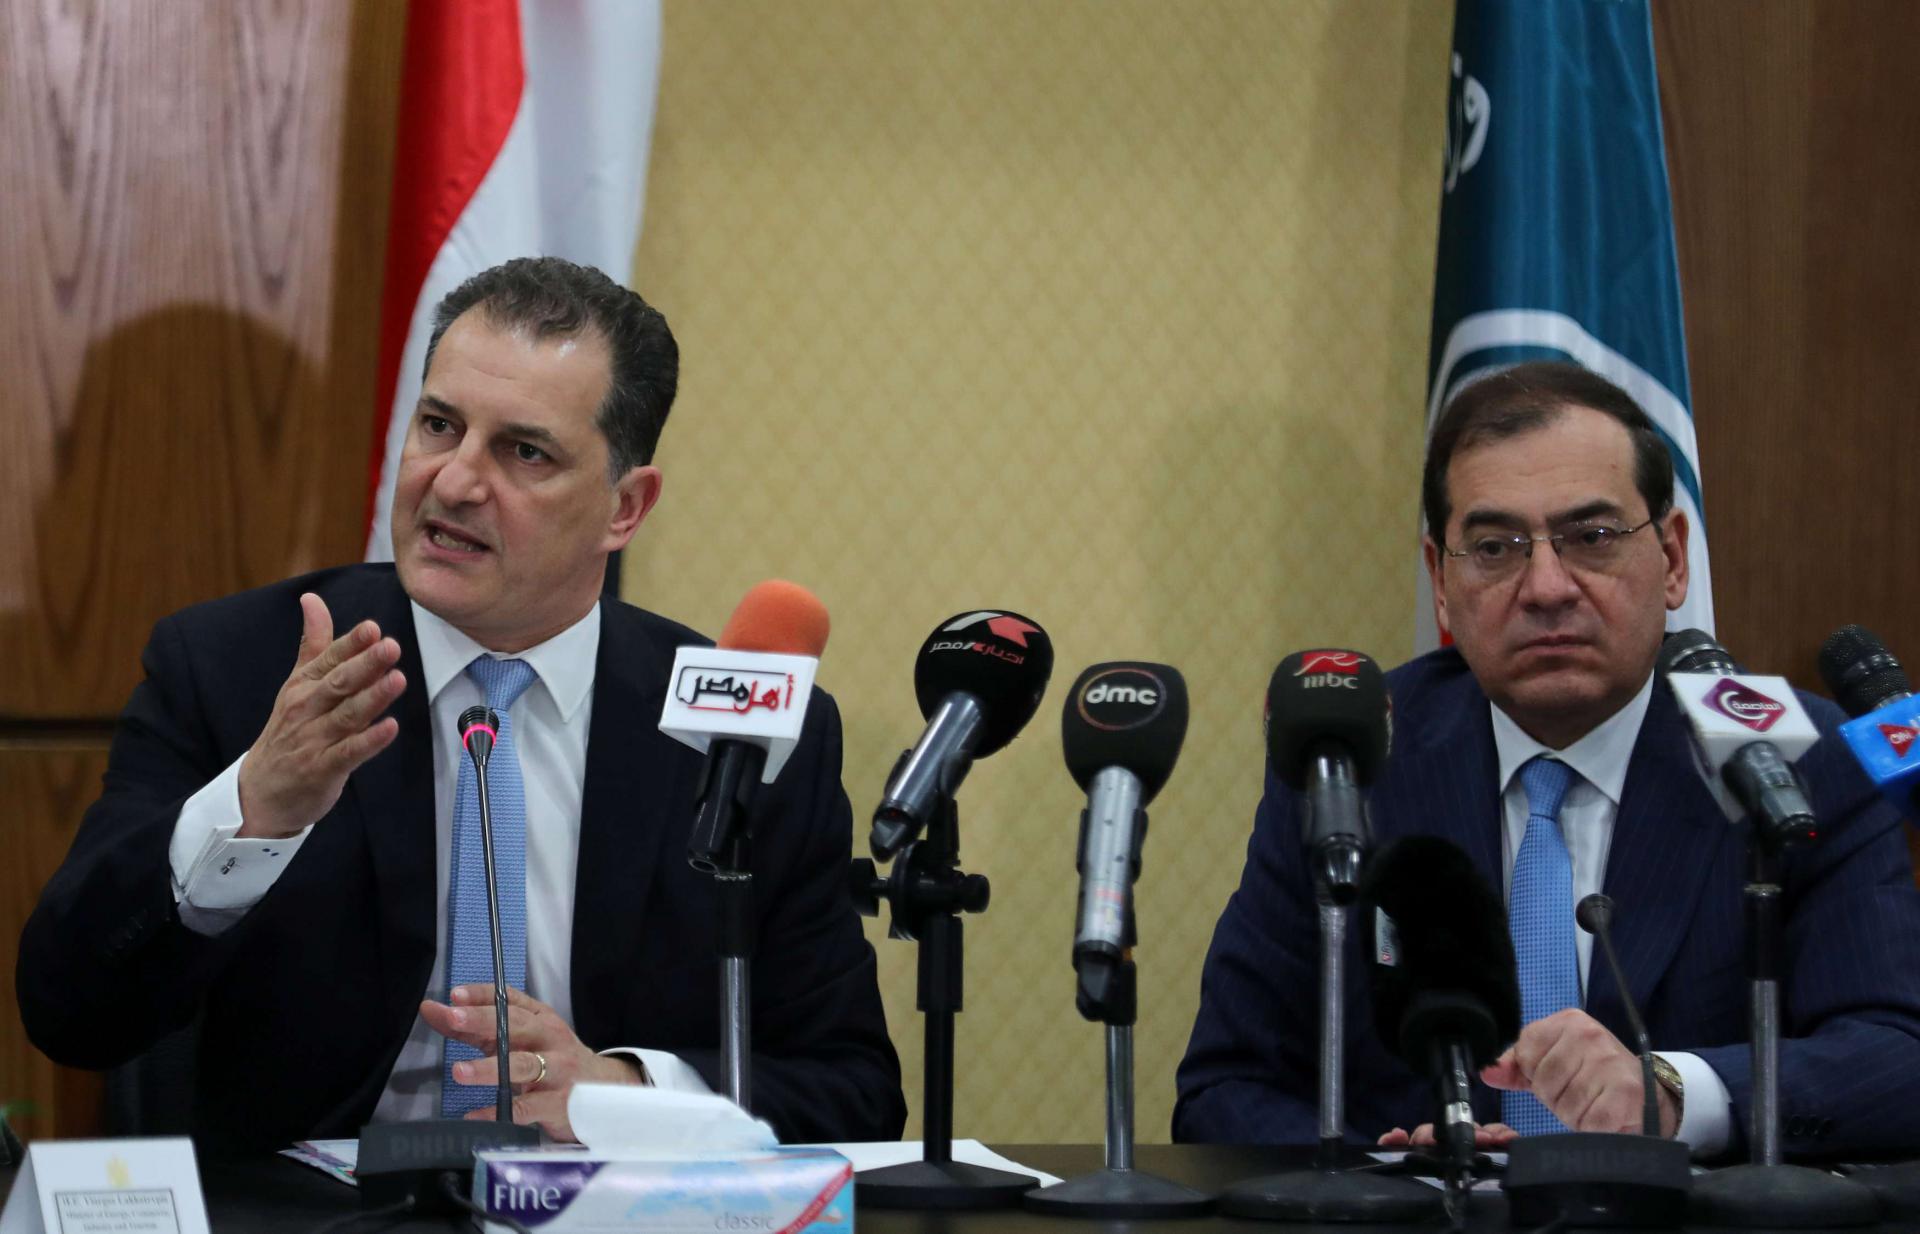 Cyprus' Minister of Energy Yiorgos Lakkotrypis gestures during a joint news conference with Egypt's Minister of Petroleum Tariq al-Mulla in Cairo